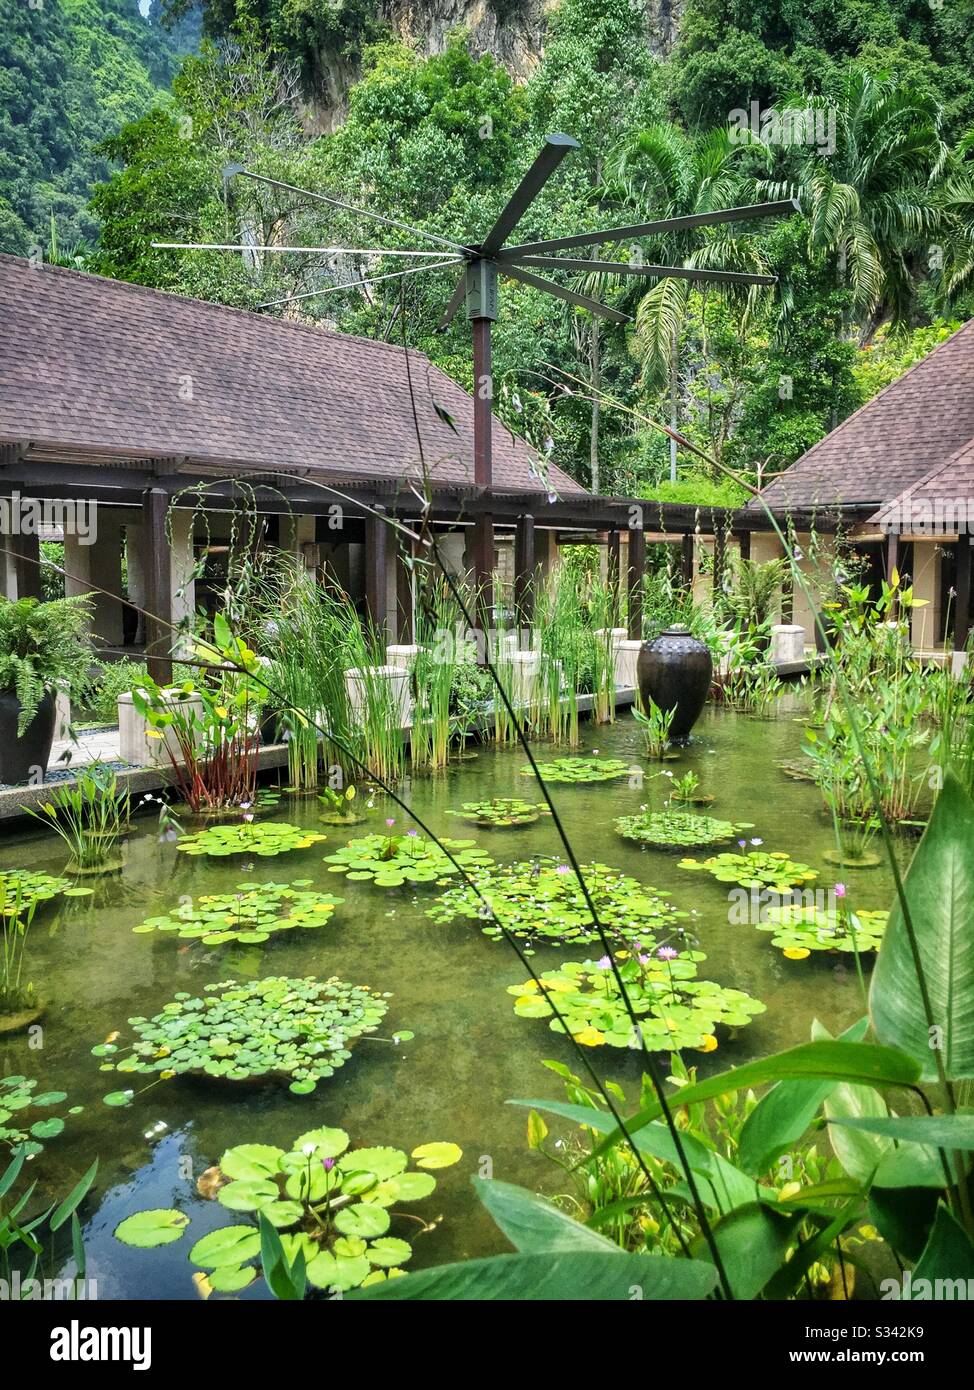 Ponds, water features, aquatic plants and giant cooling fans are a feature of the landscaping at The Banjaran Hotsprings Retreat near Ipoh, Malaysia Stock Photo